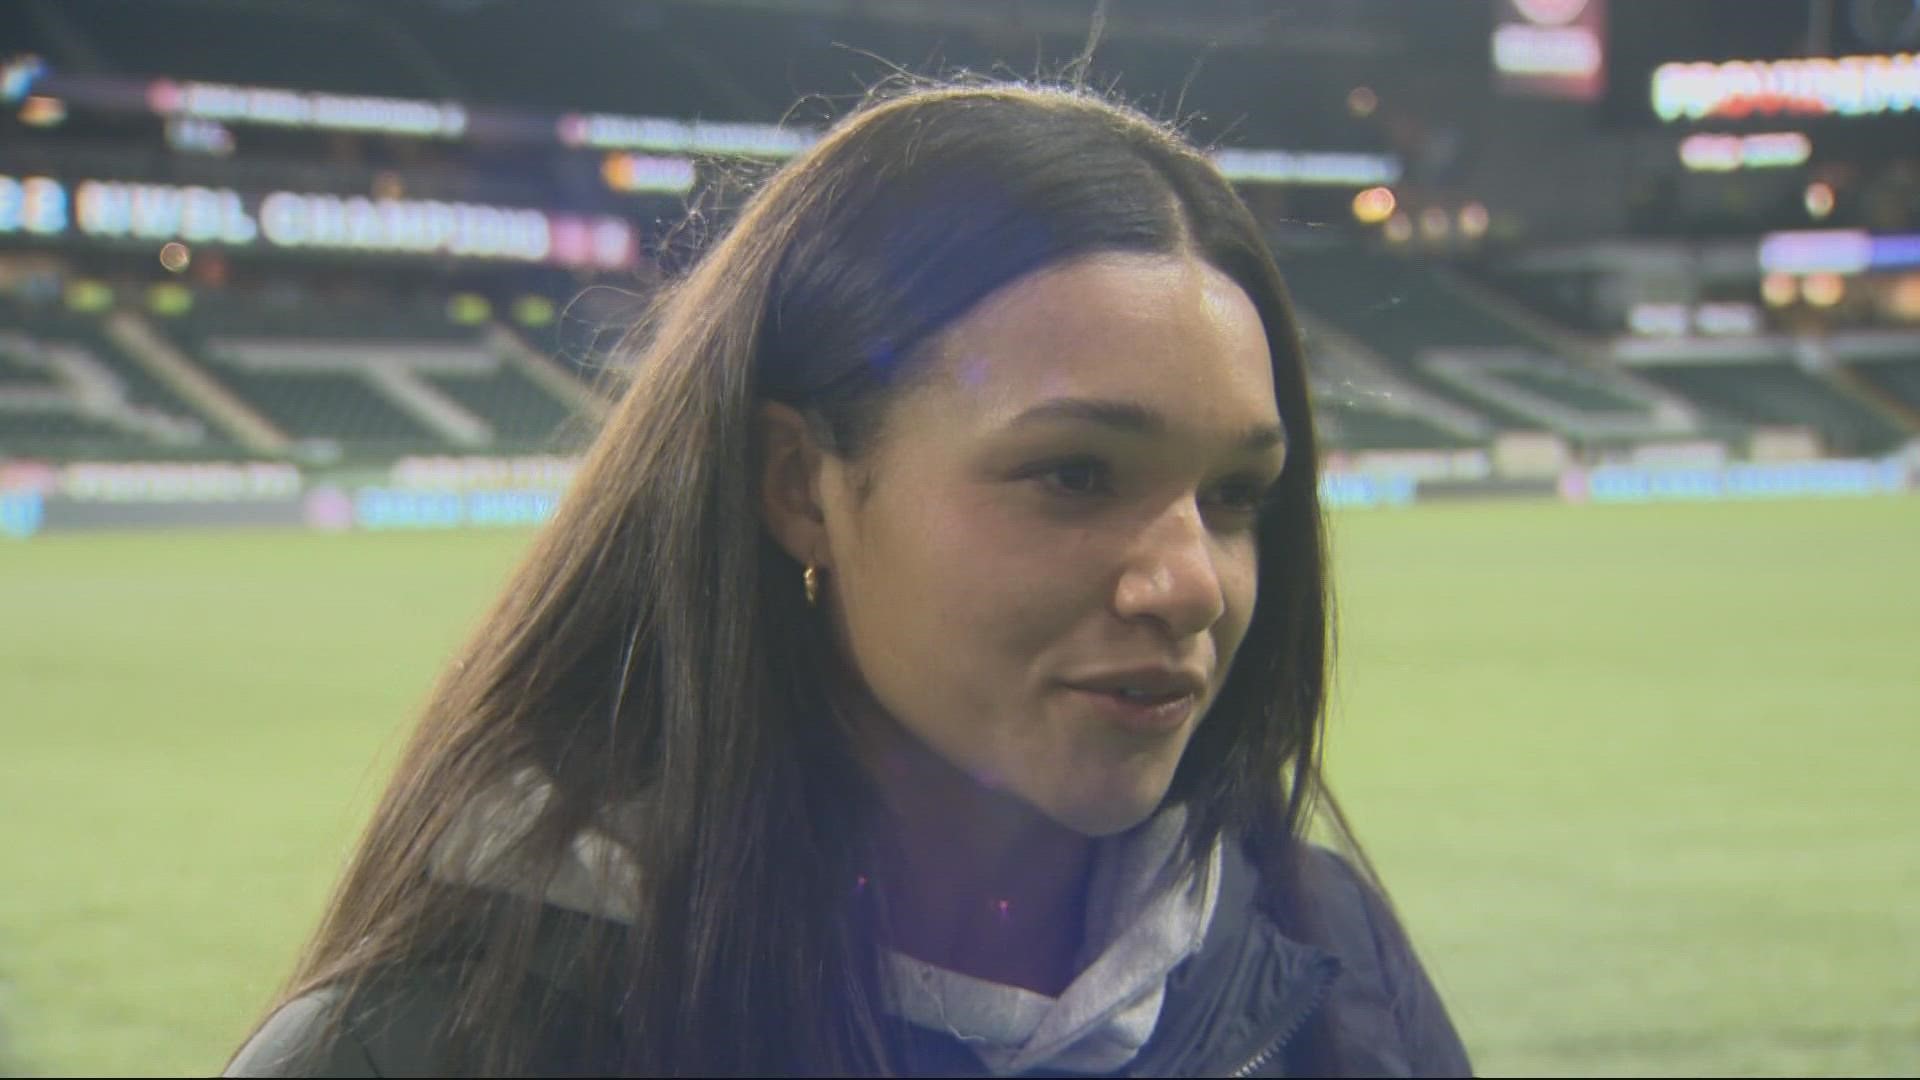 The celebration at Providence Park was free and open to fans.